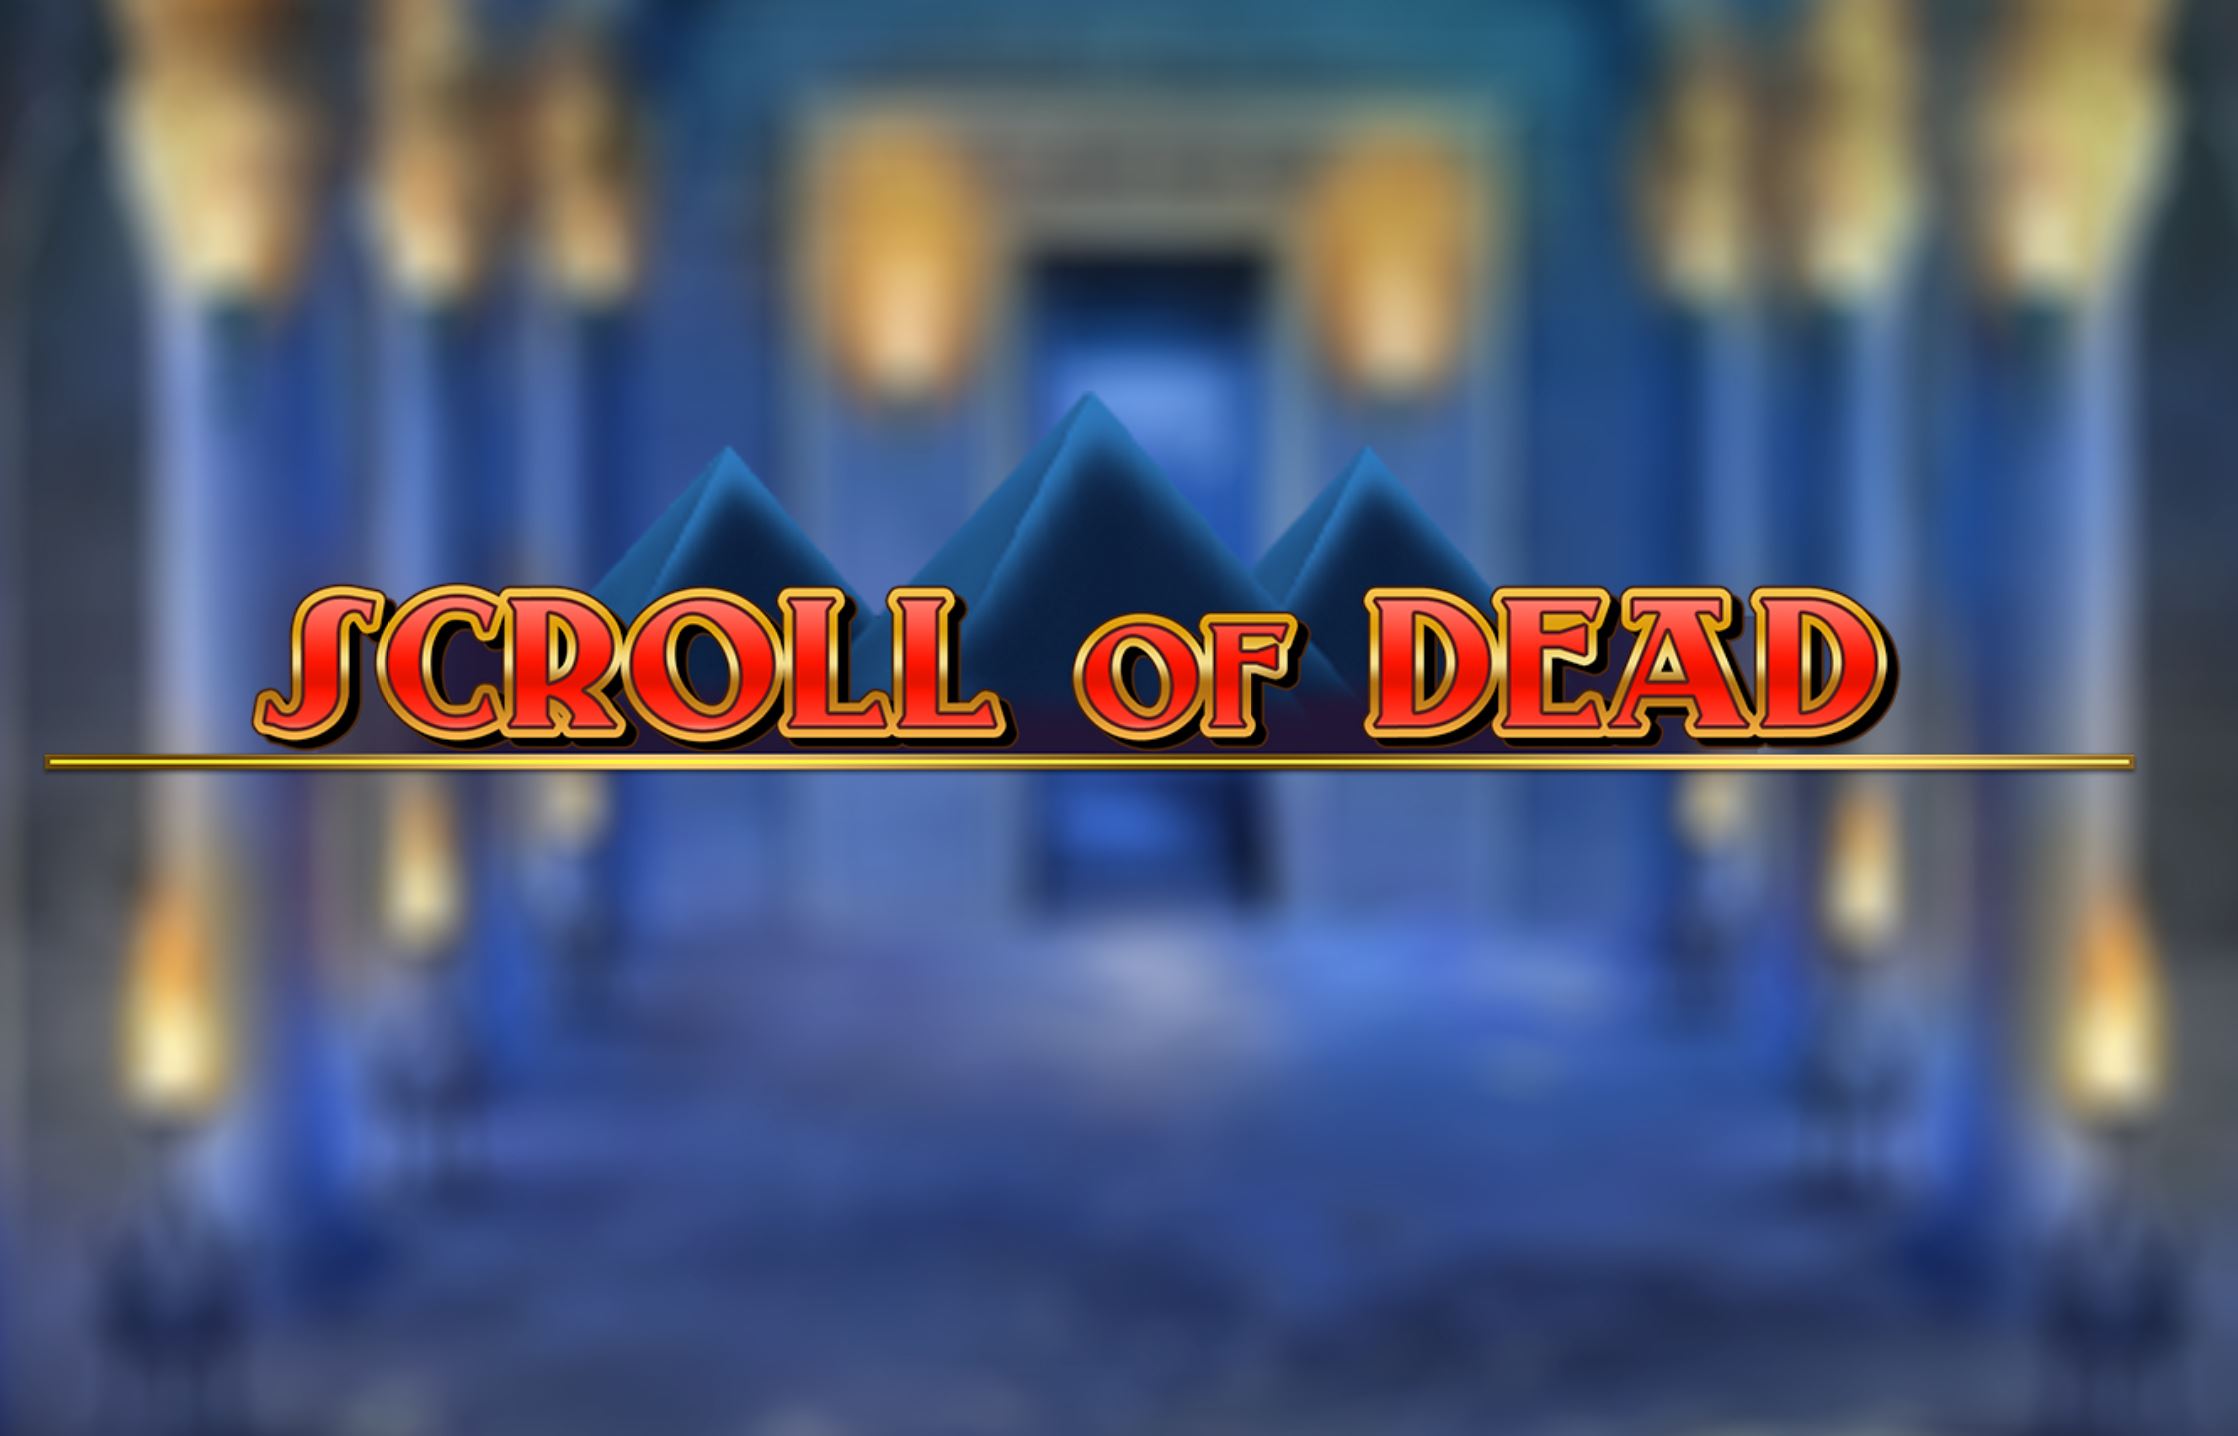 Scroll of Dead game review